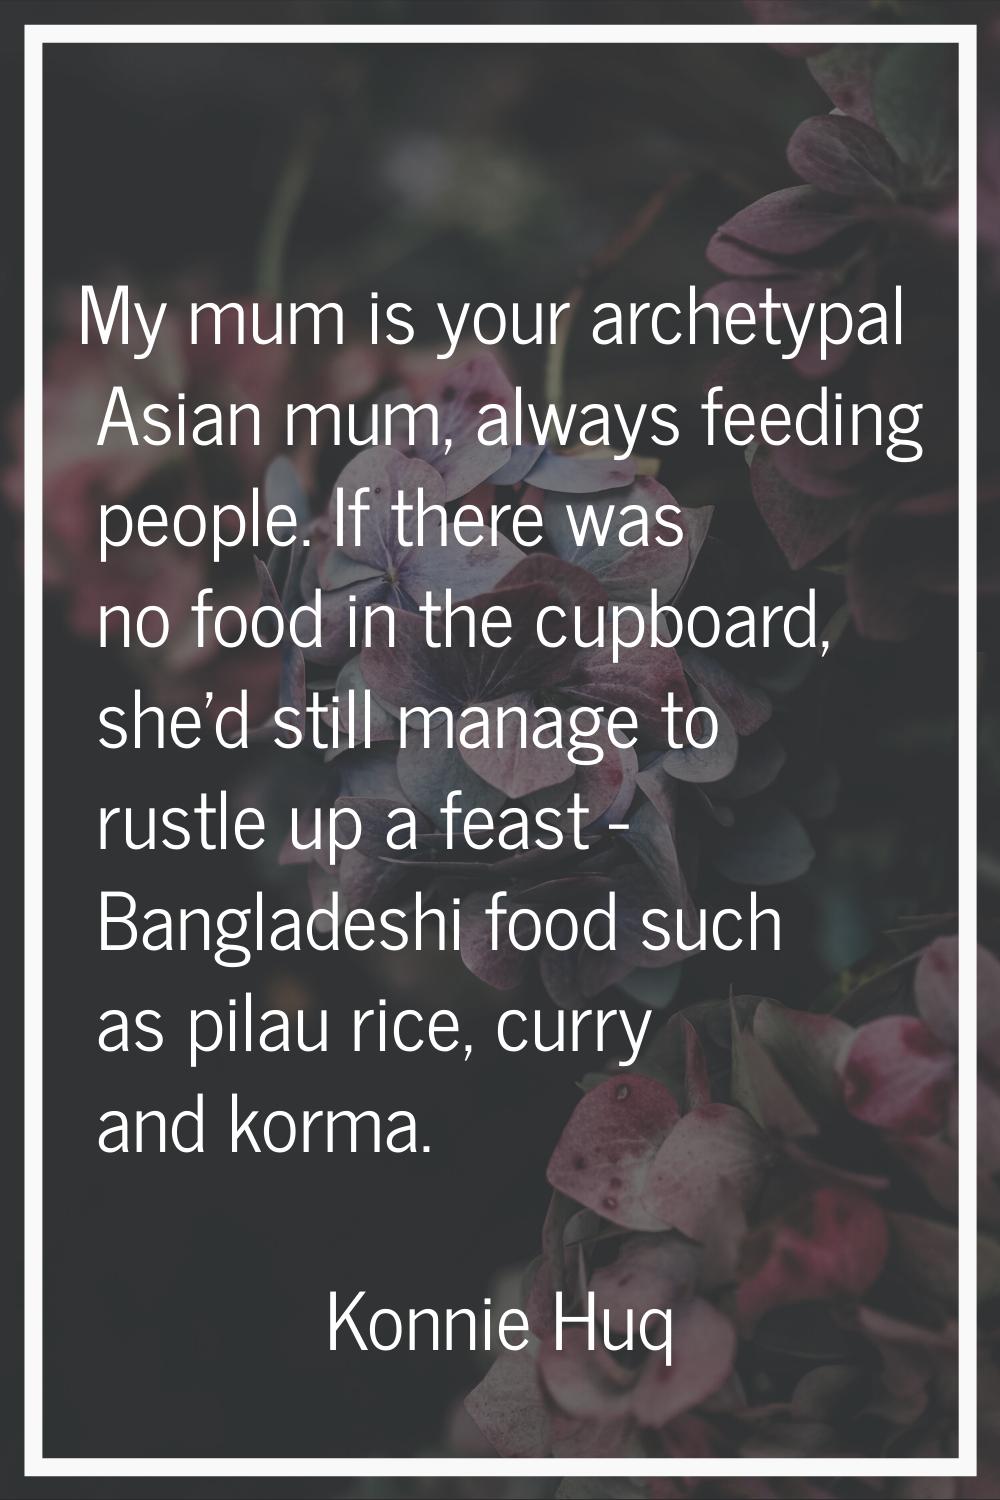 My mum is your archetypal Asian mum, always feeding people. If there was no food in the cupboard, s